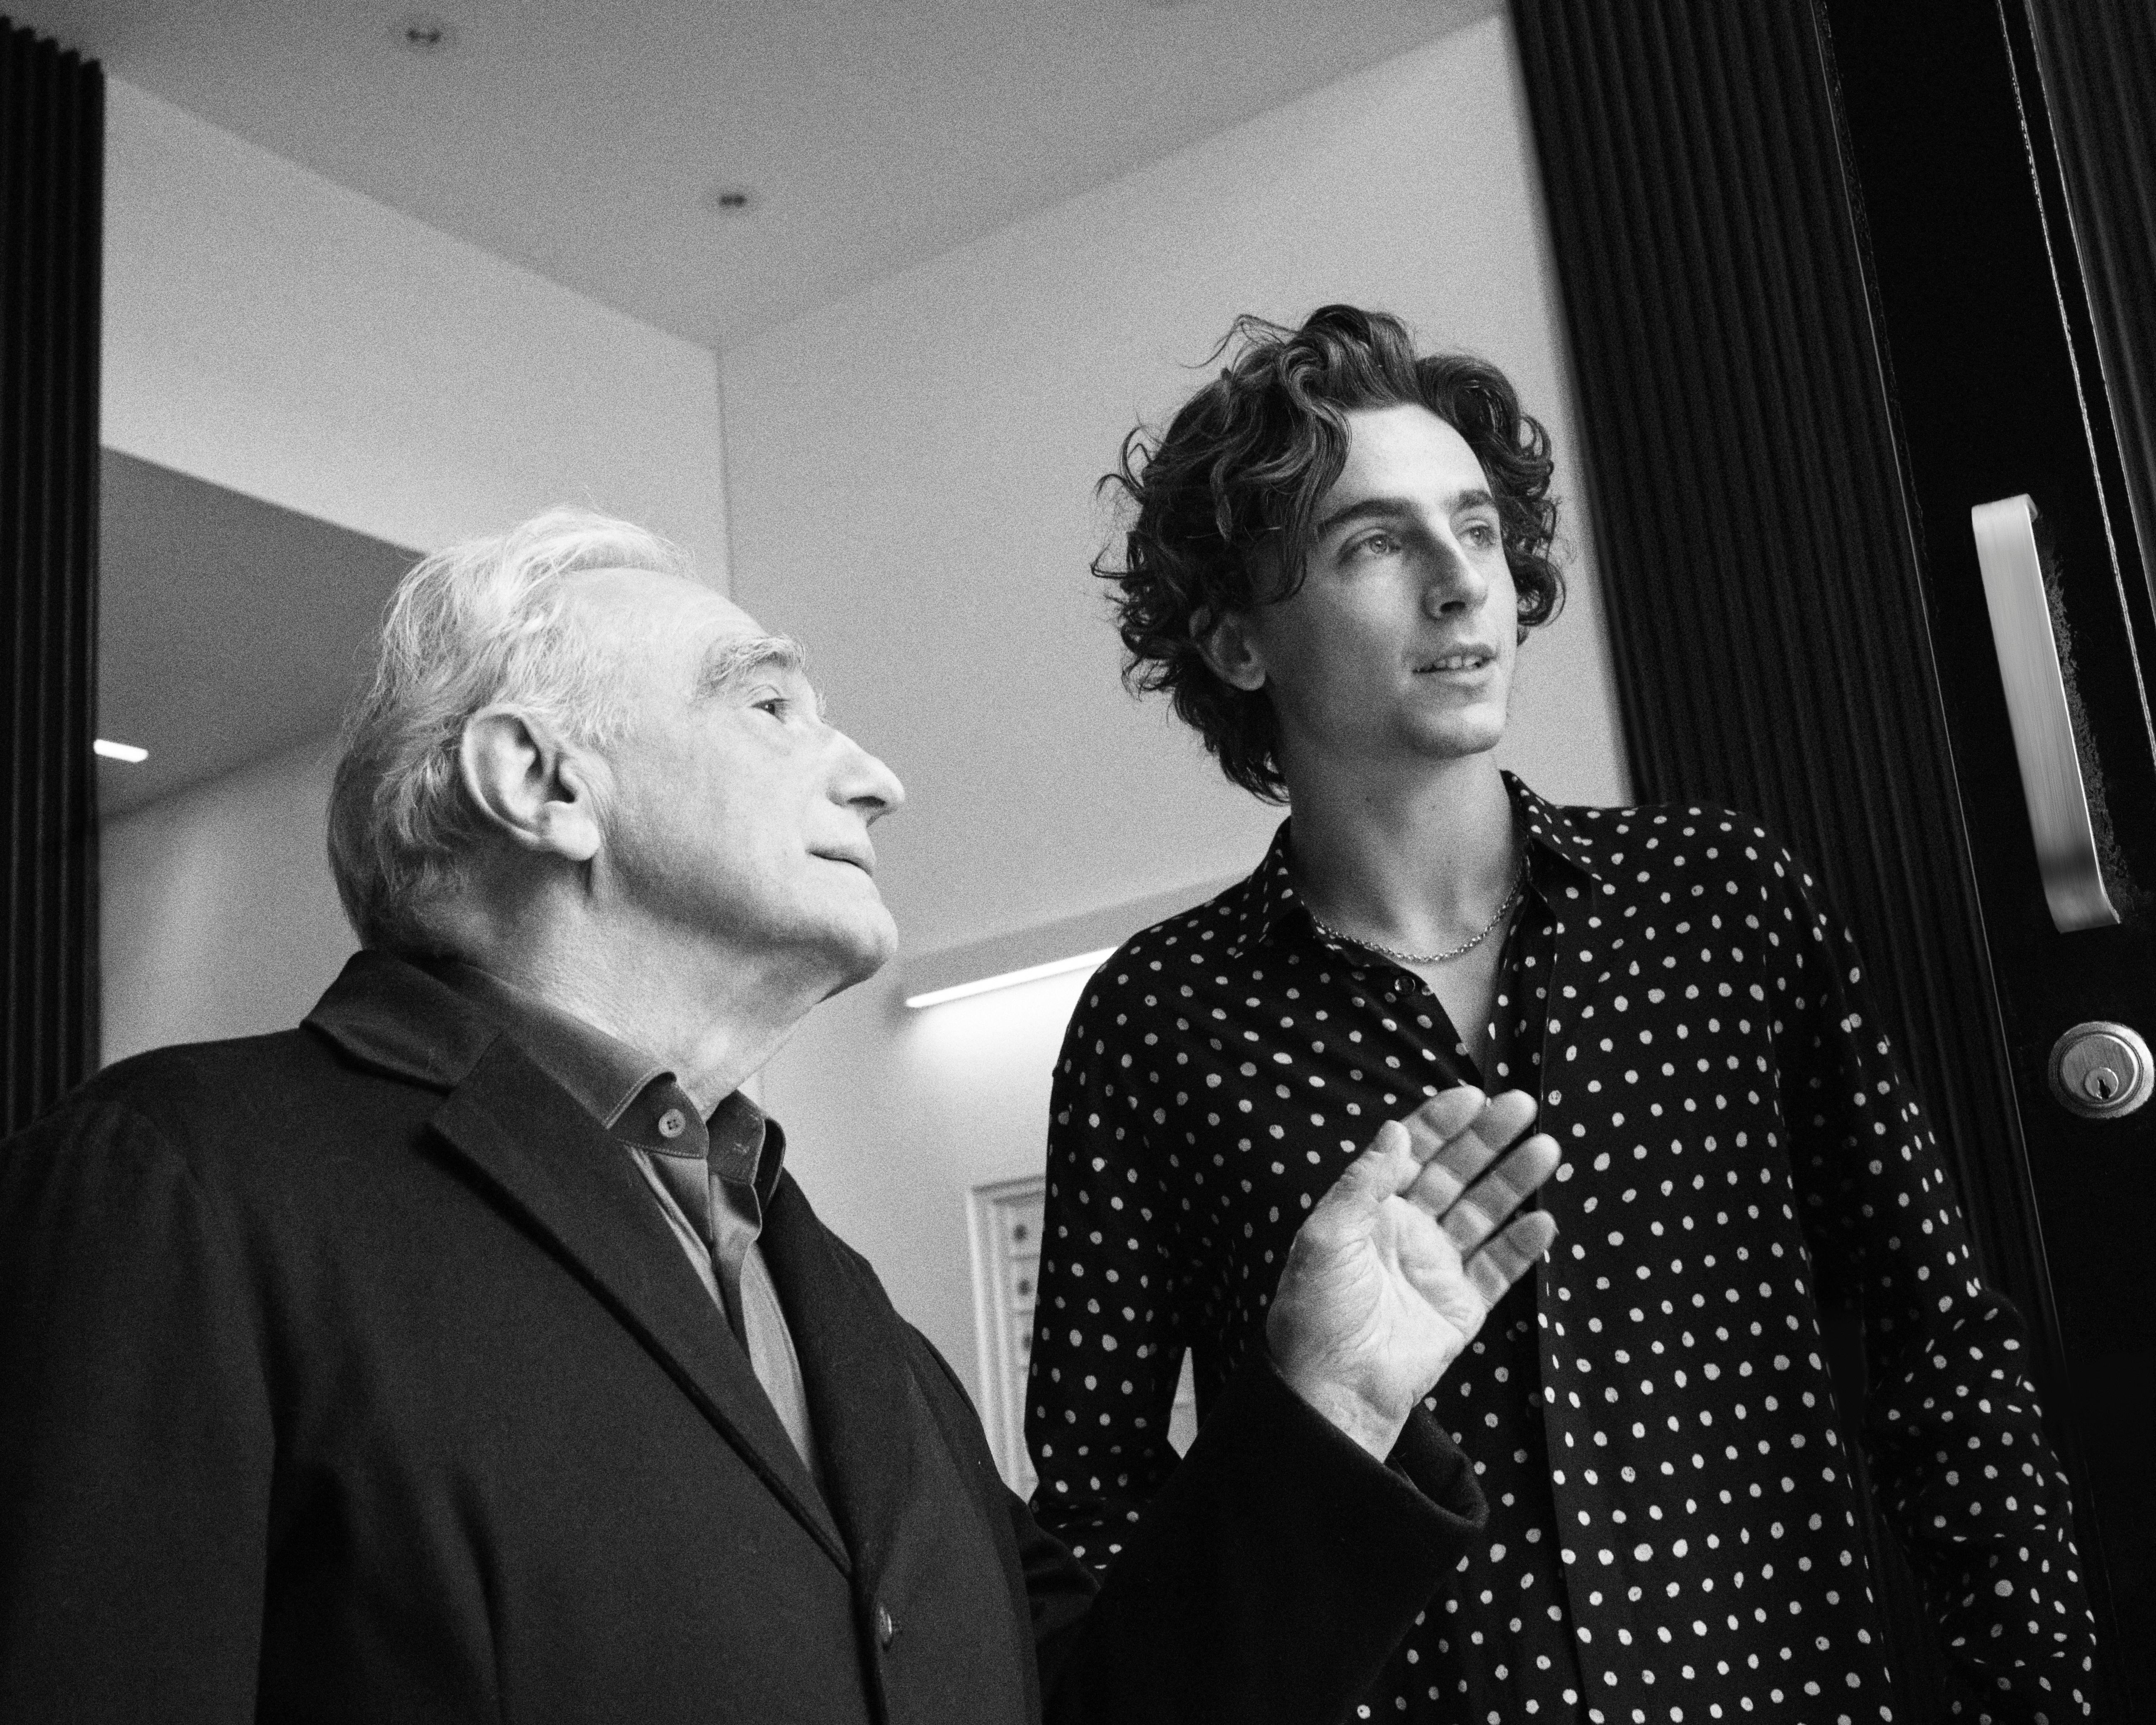 A First Look at Timothée Chalamet Starring in Martin Scorsese's Bleu de  Chanel Campaign